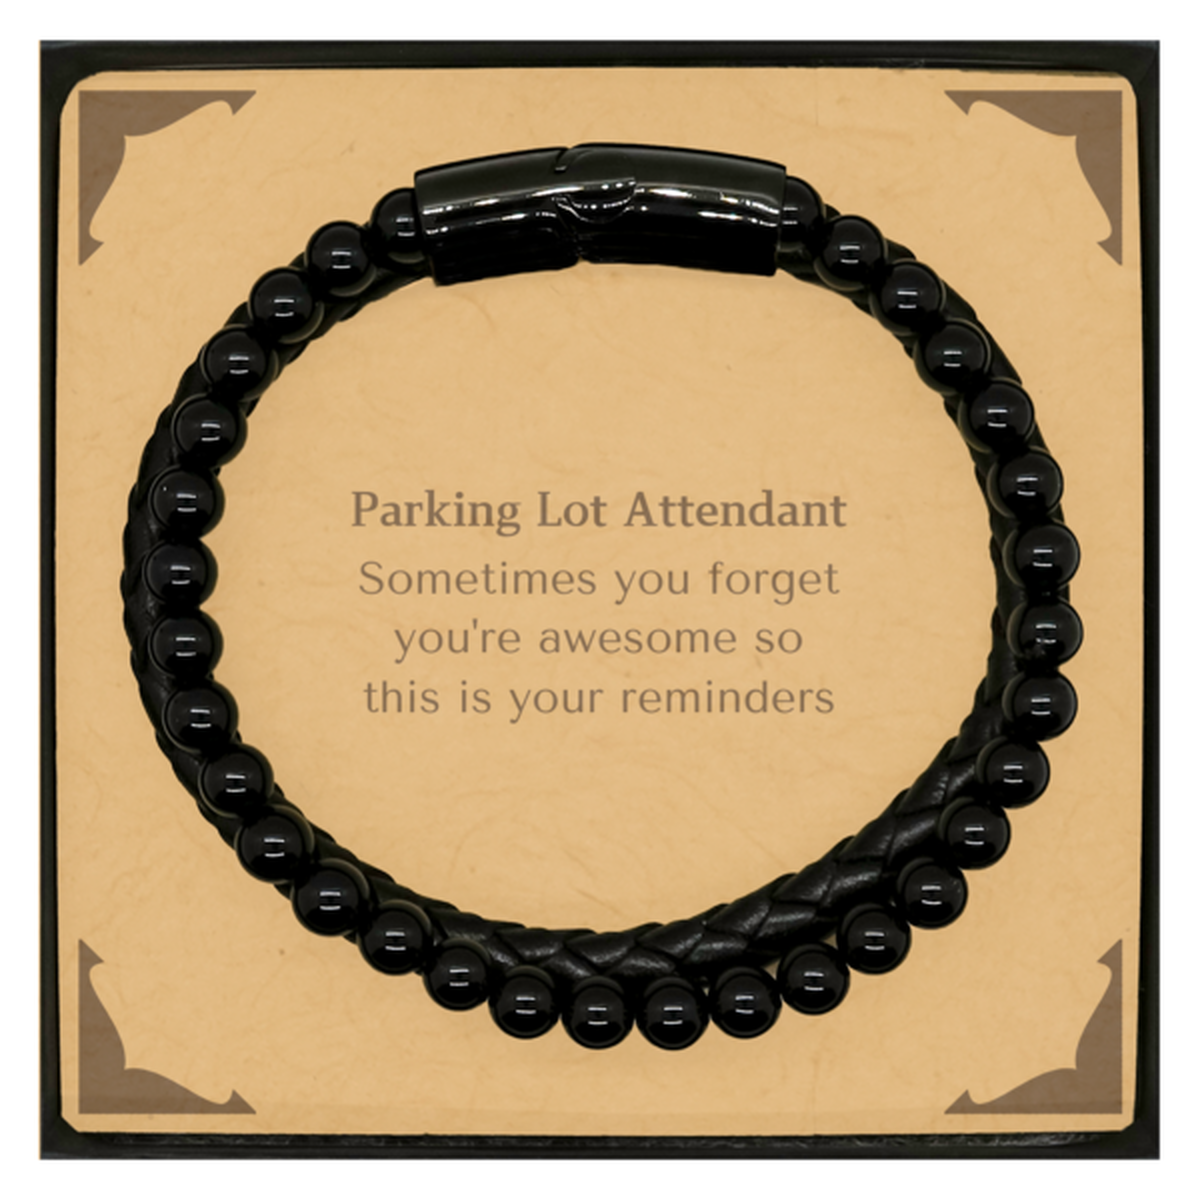 Sentimental Parking Lot Attendant Stone Leather Bracelets, Parking Lot Attendant Sometimes you forget you're awesome so this is your reminders, Graduation Christmas Birthday Gifts for Parking Lot Attendant, Men, Women, Coworkers